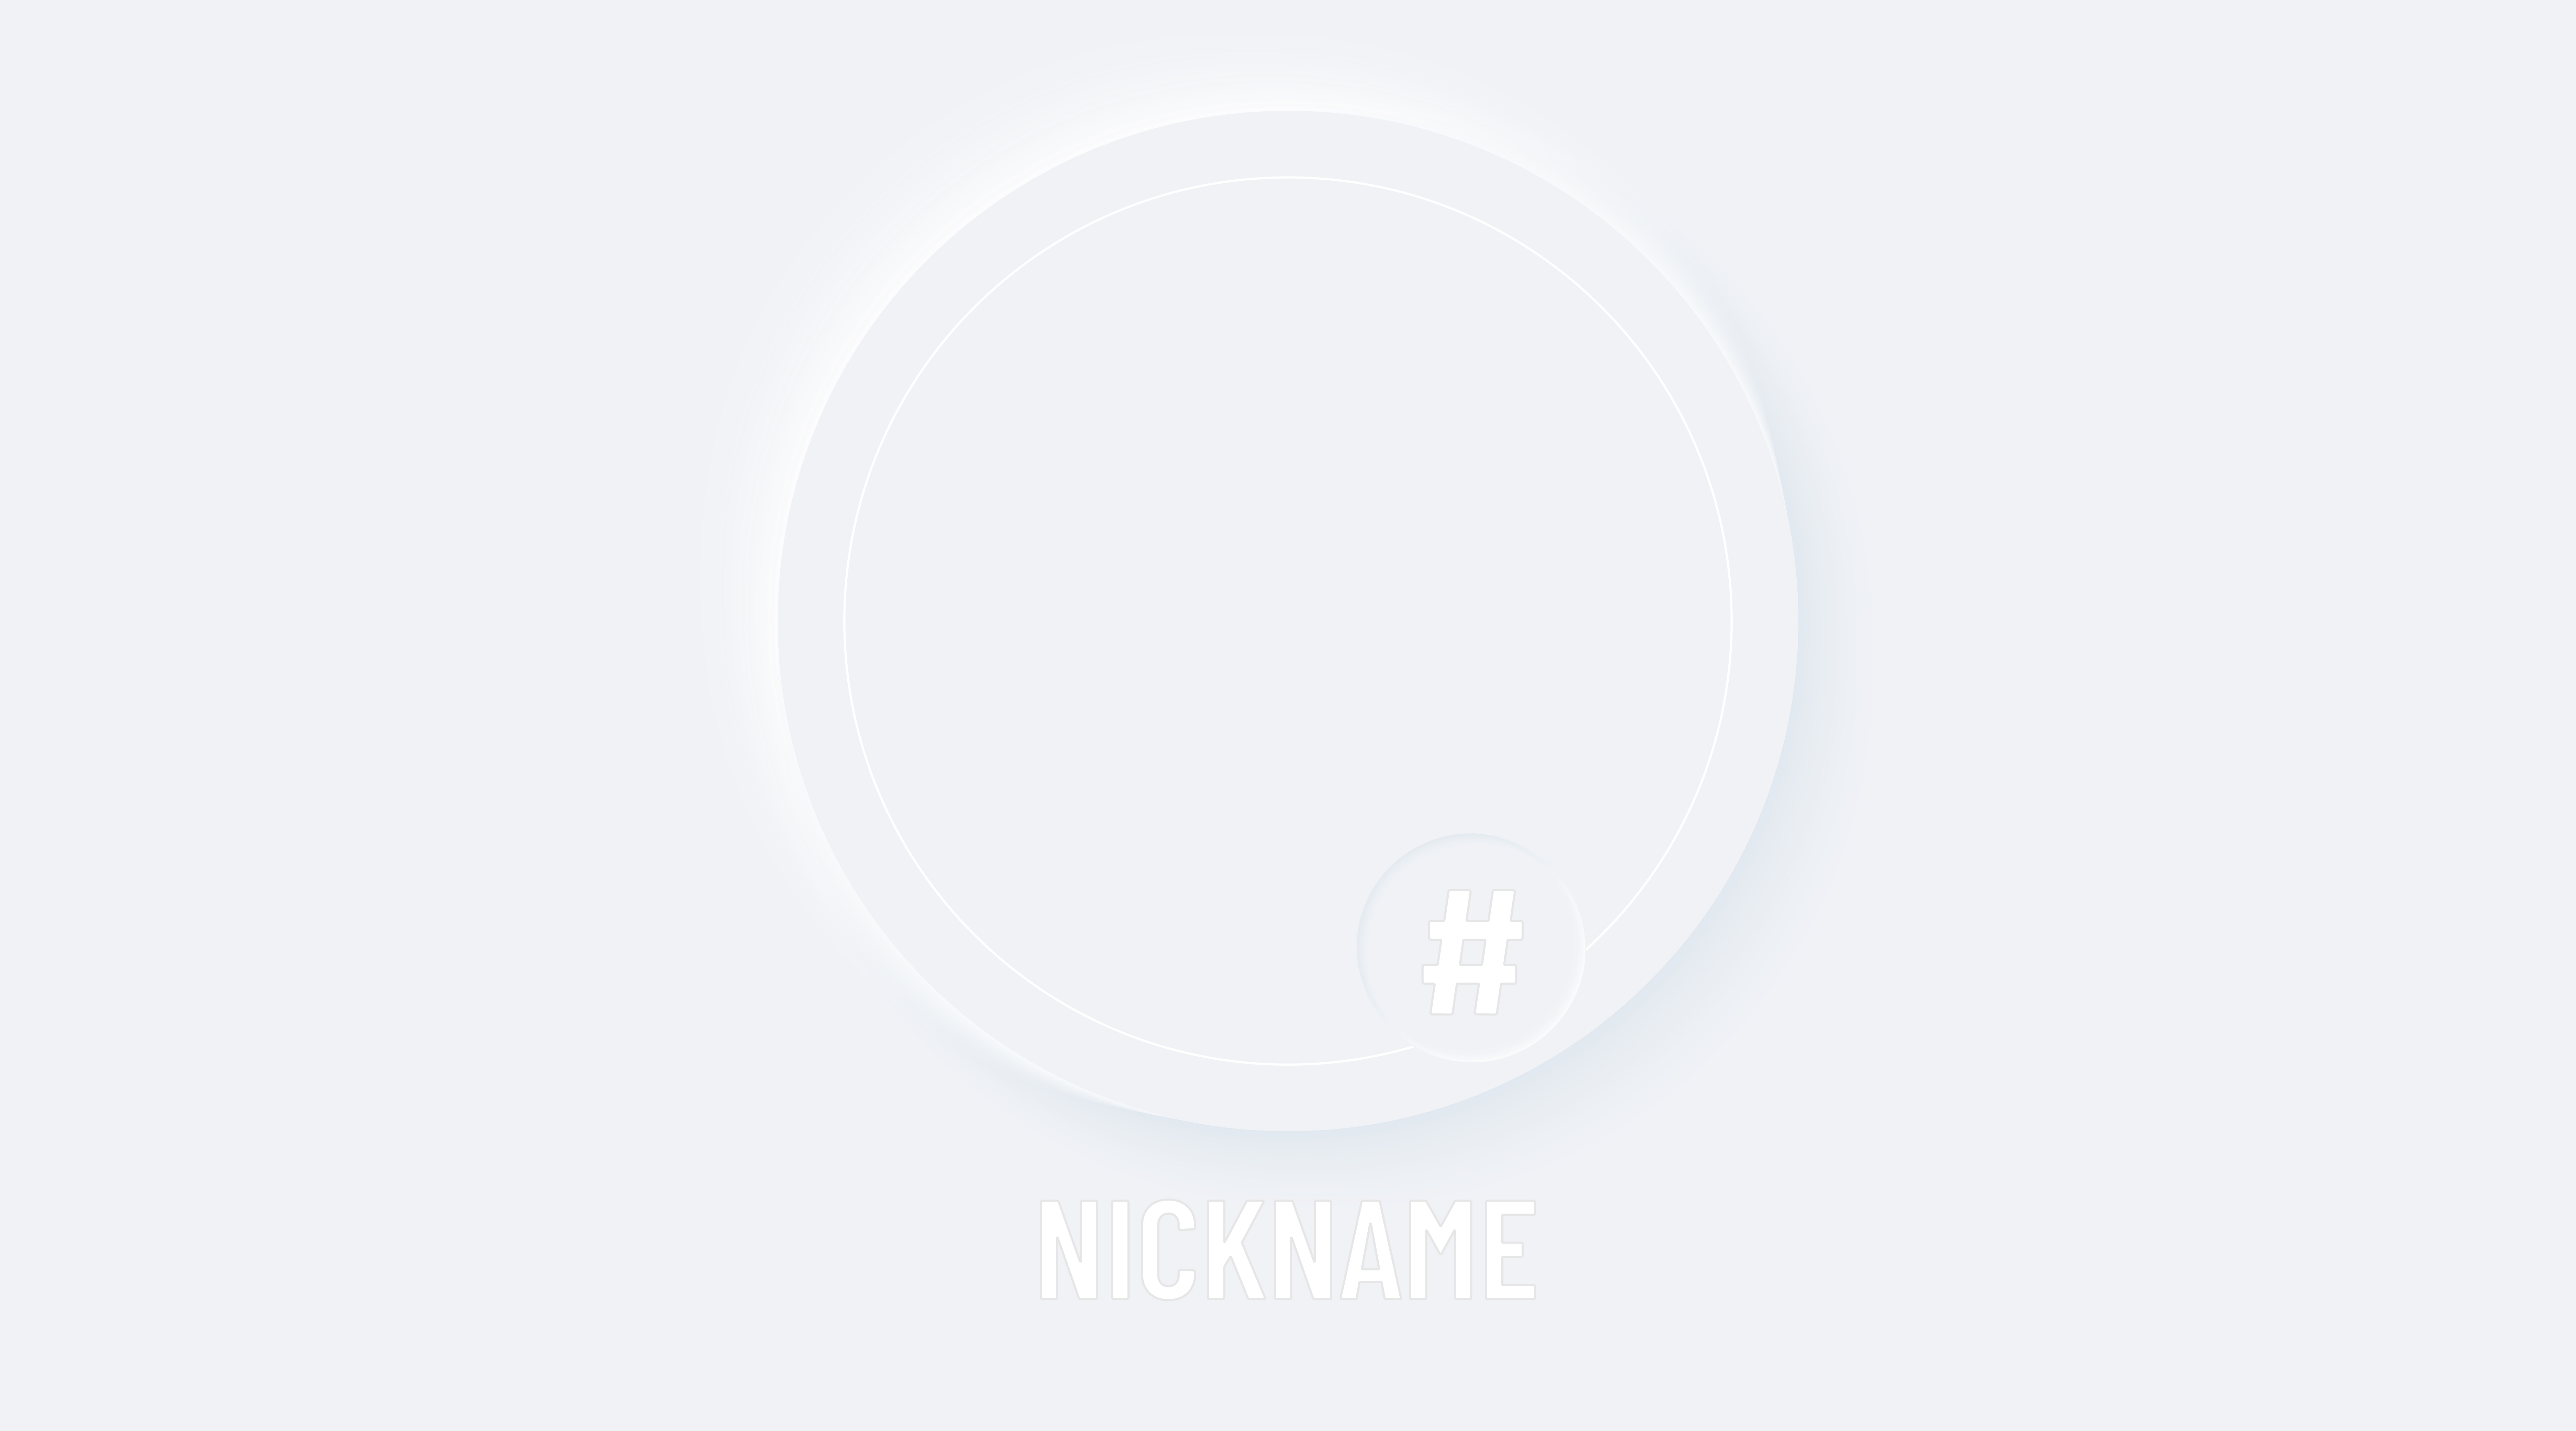 Nickname and hashtag. Frame for avatars photo on social media networks. Soft vector button, neumorphic circle frame icon.